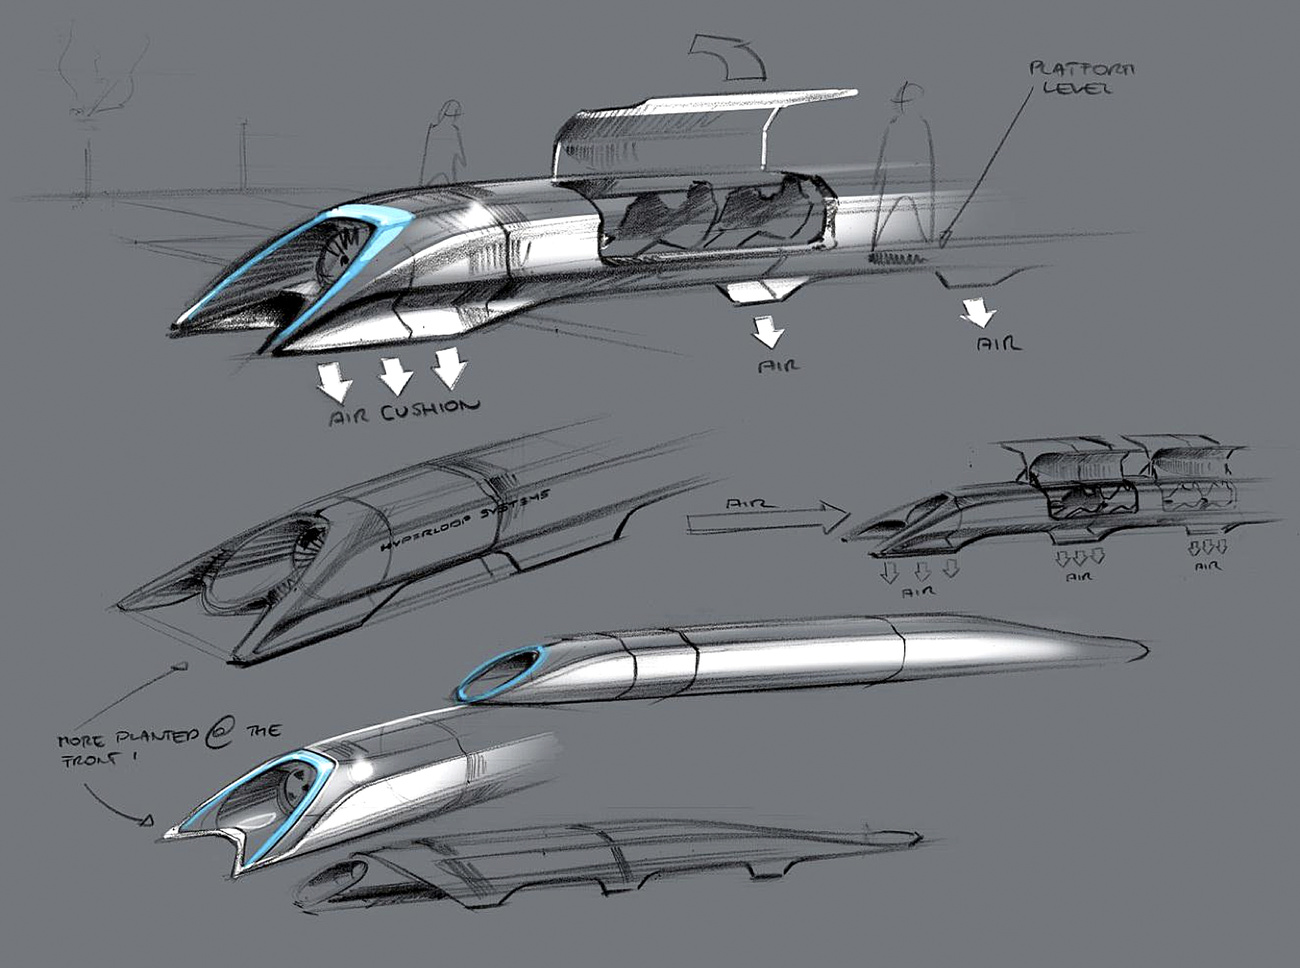 Conceptual design sketches released by Tesla Motors in August 2013 as part of a white paper on hyperloop passenger transp